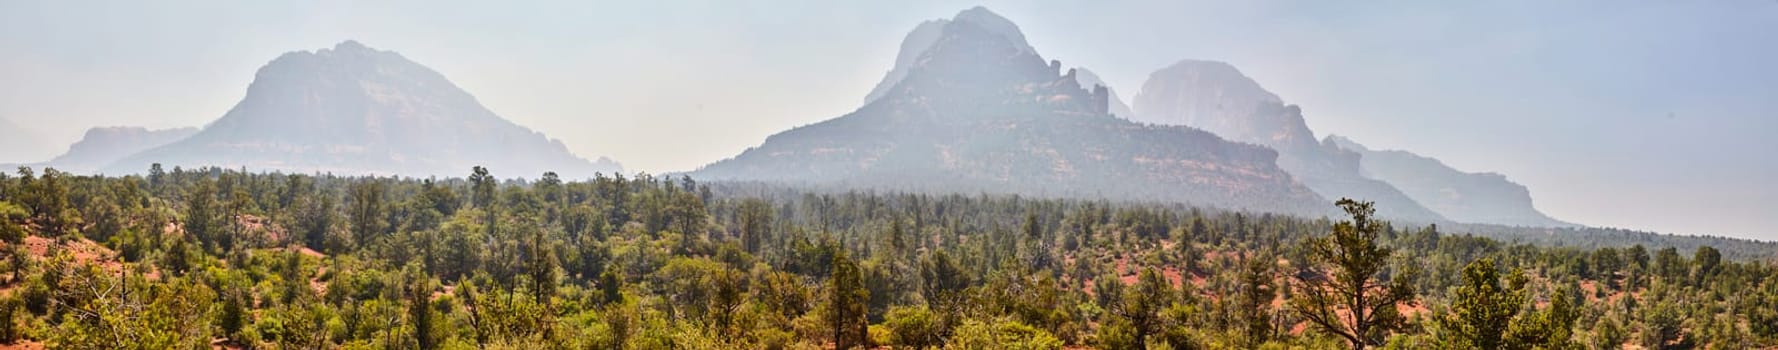 Panoramic daytime view of Arizona's Sedona red rock mountains towering over lush evergreen forest in 2016